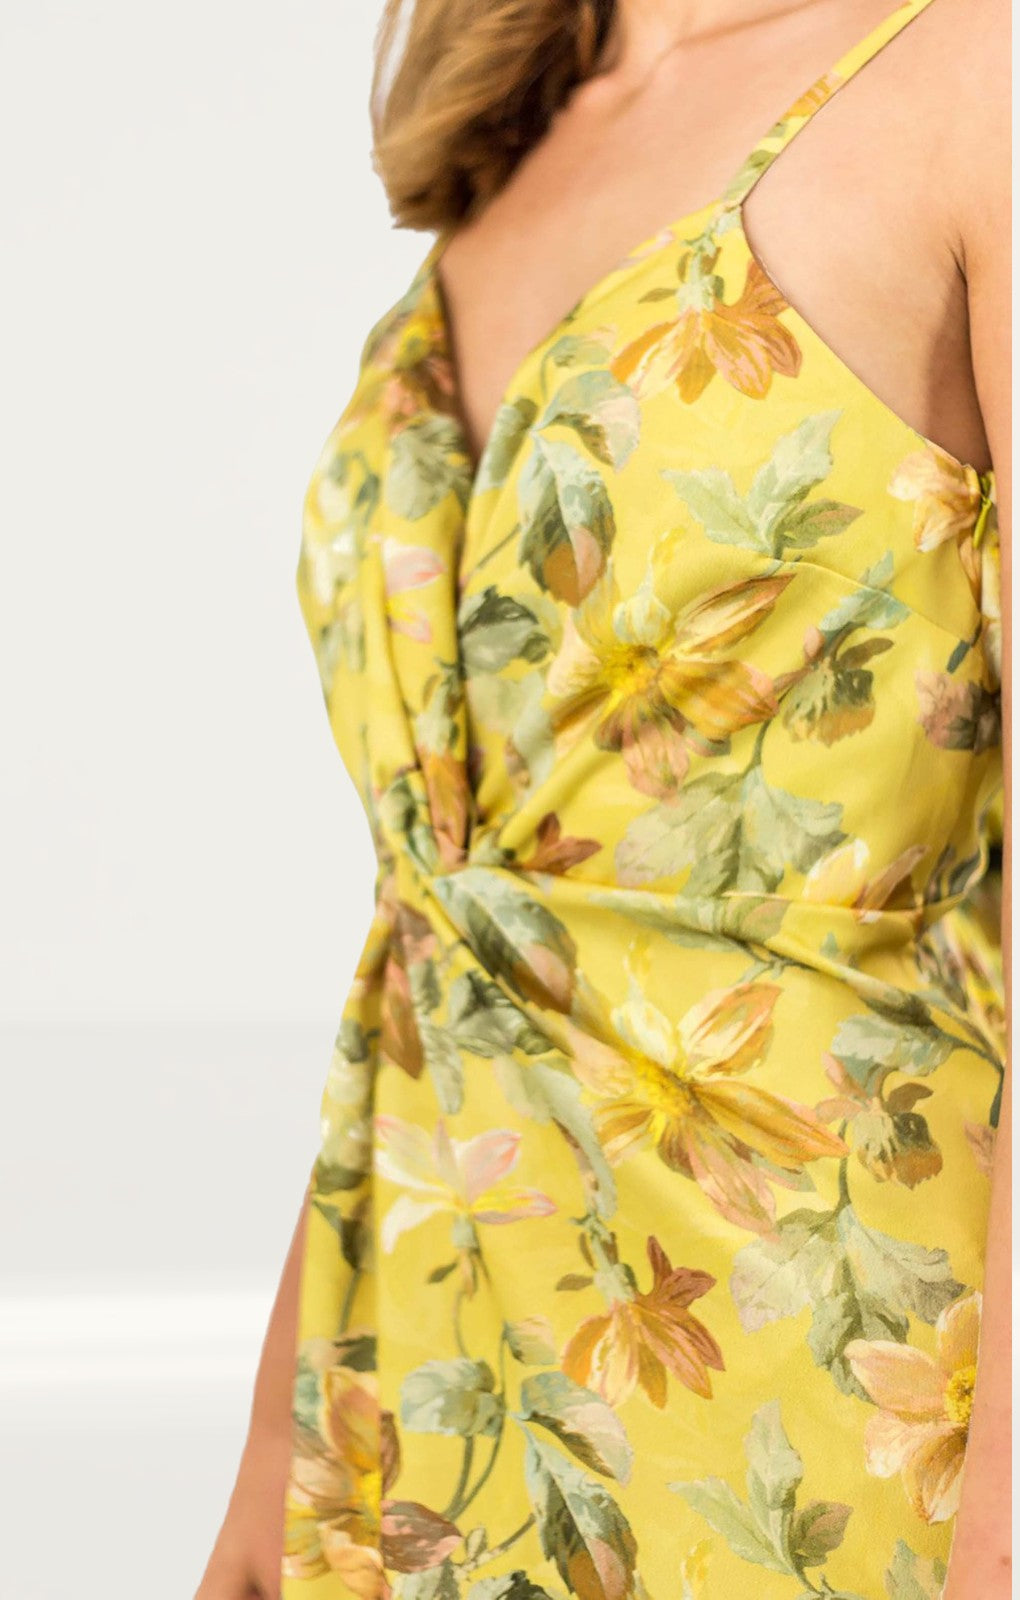 Hope & Ivy Yellow Twist Front Floral Cami Dress product image